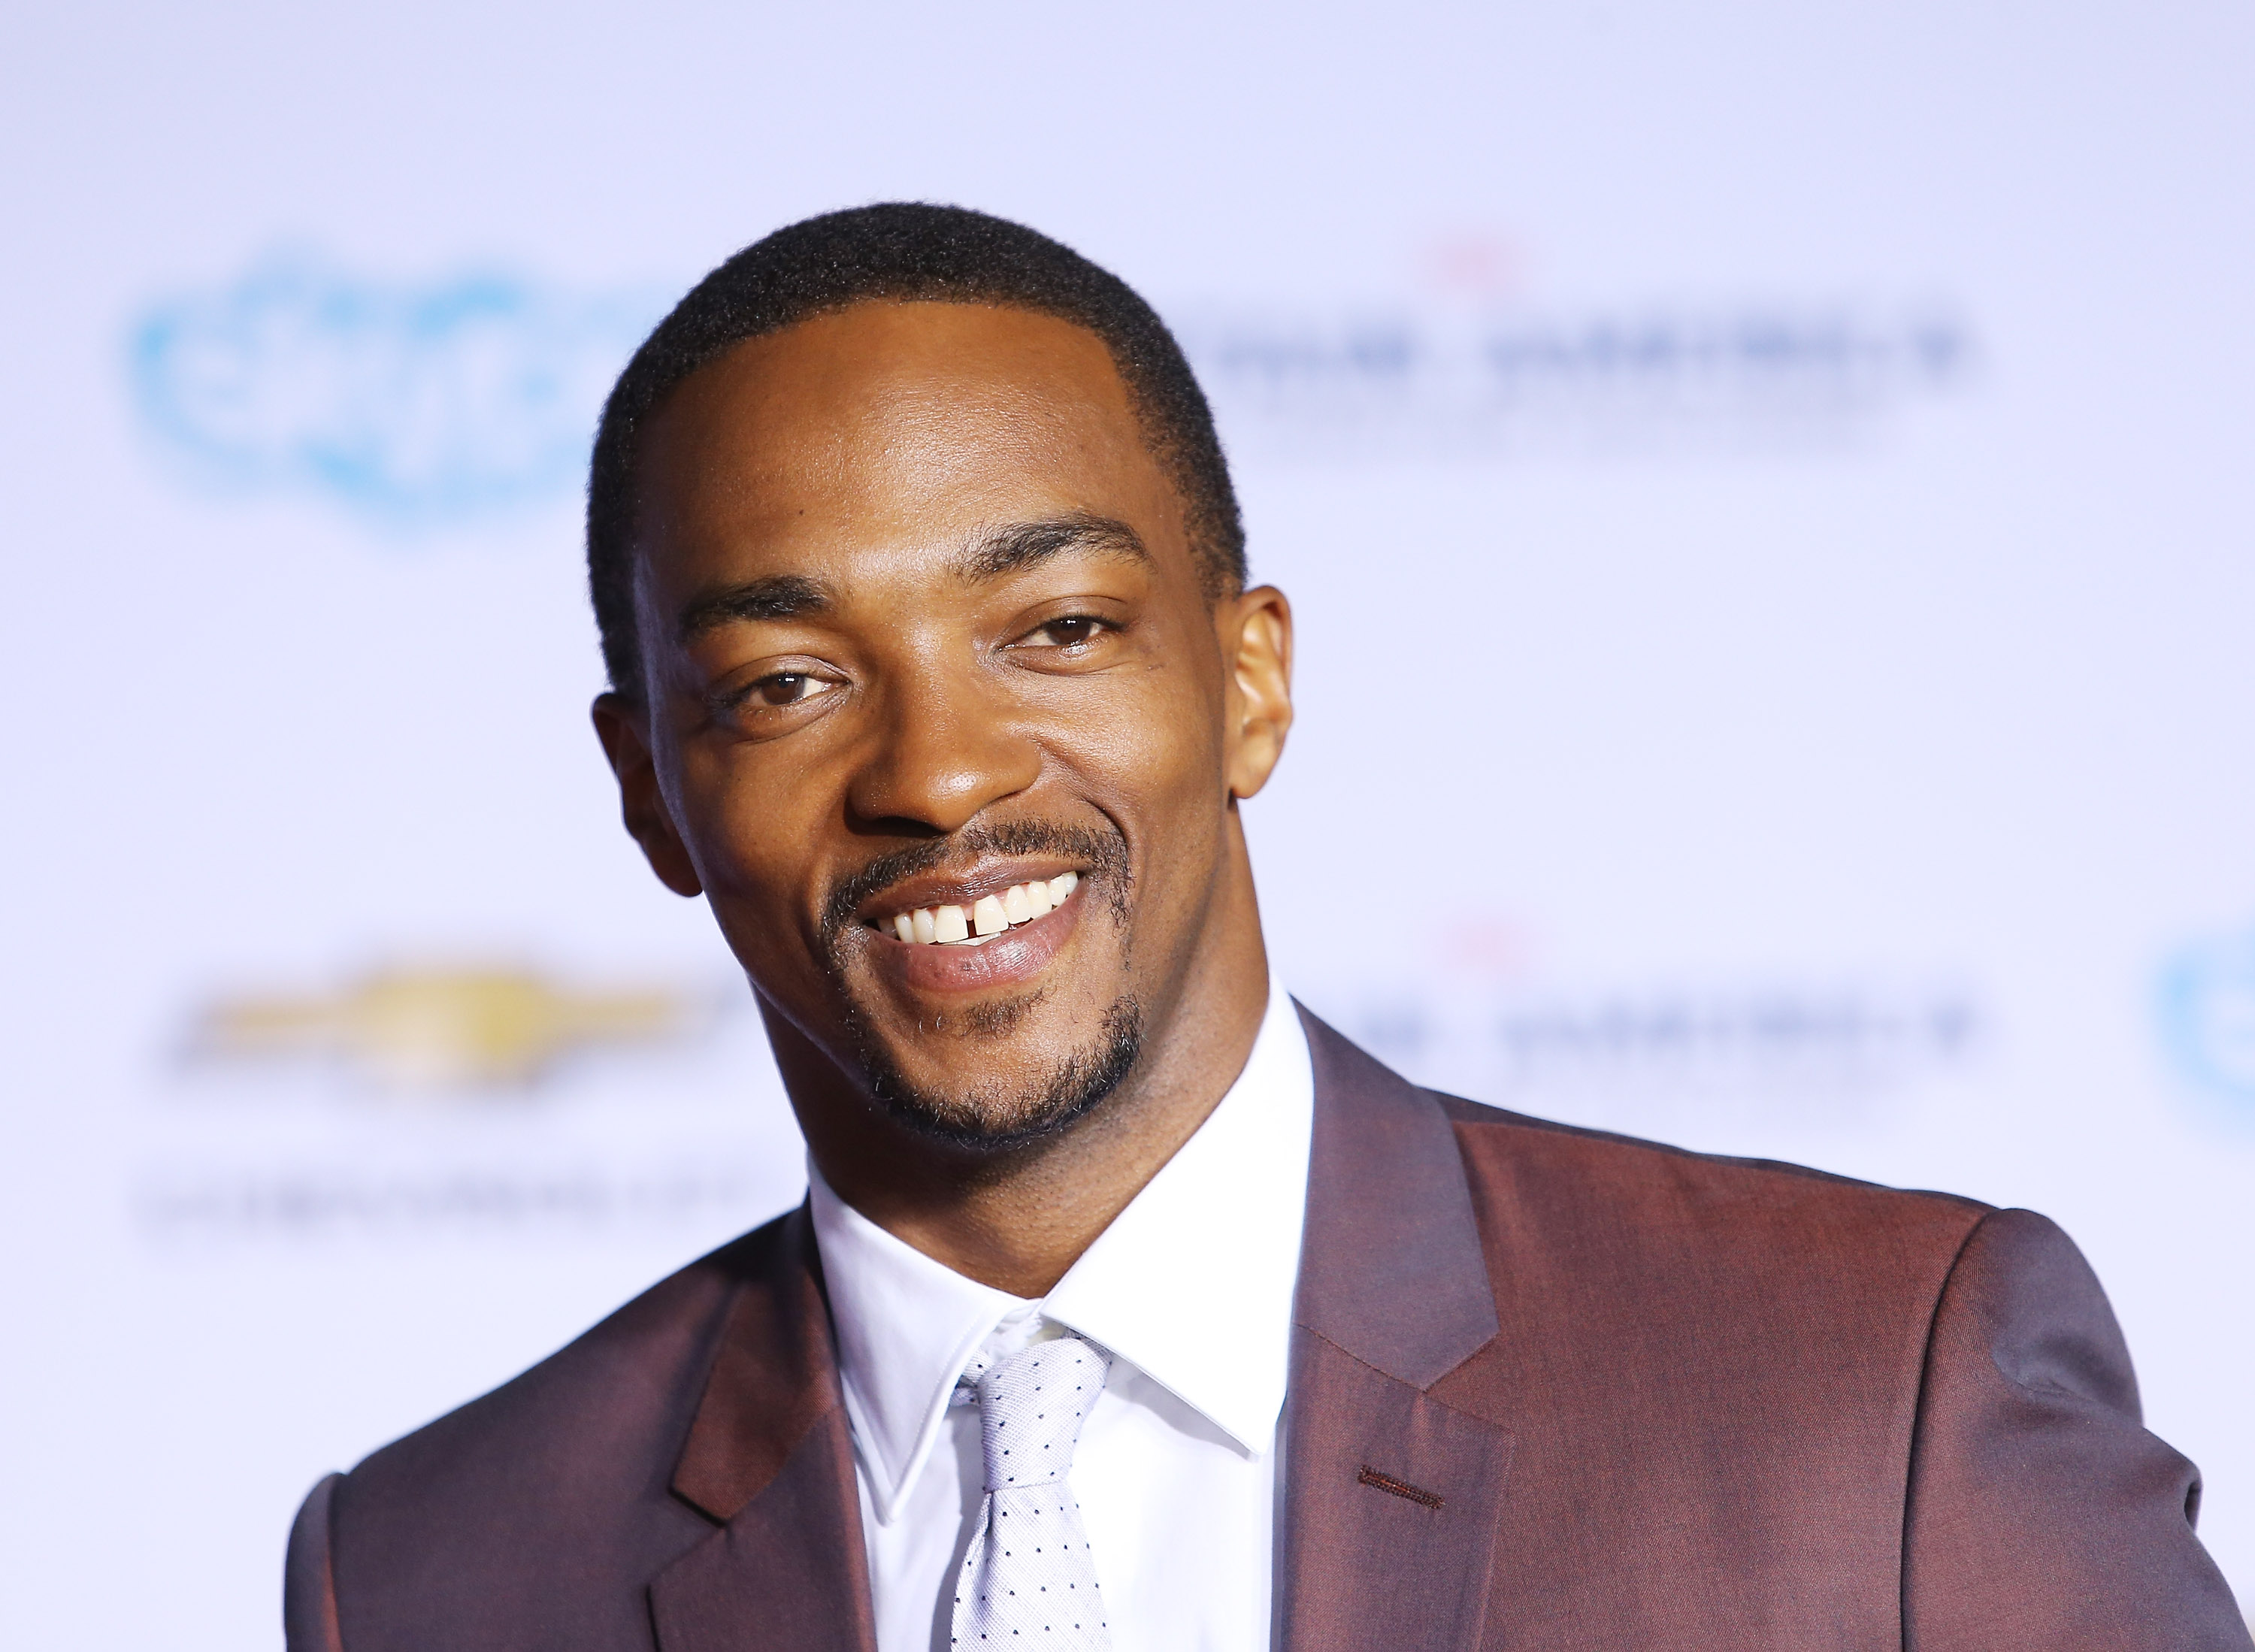 ‘Captain America 4’: Anthony Mackie Once Worked With This ‘Twilight’ Star